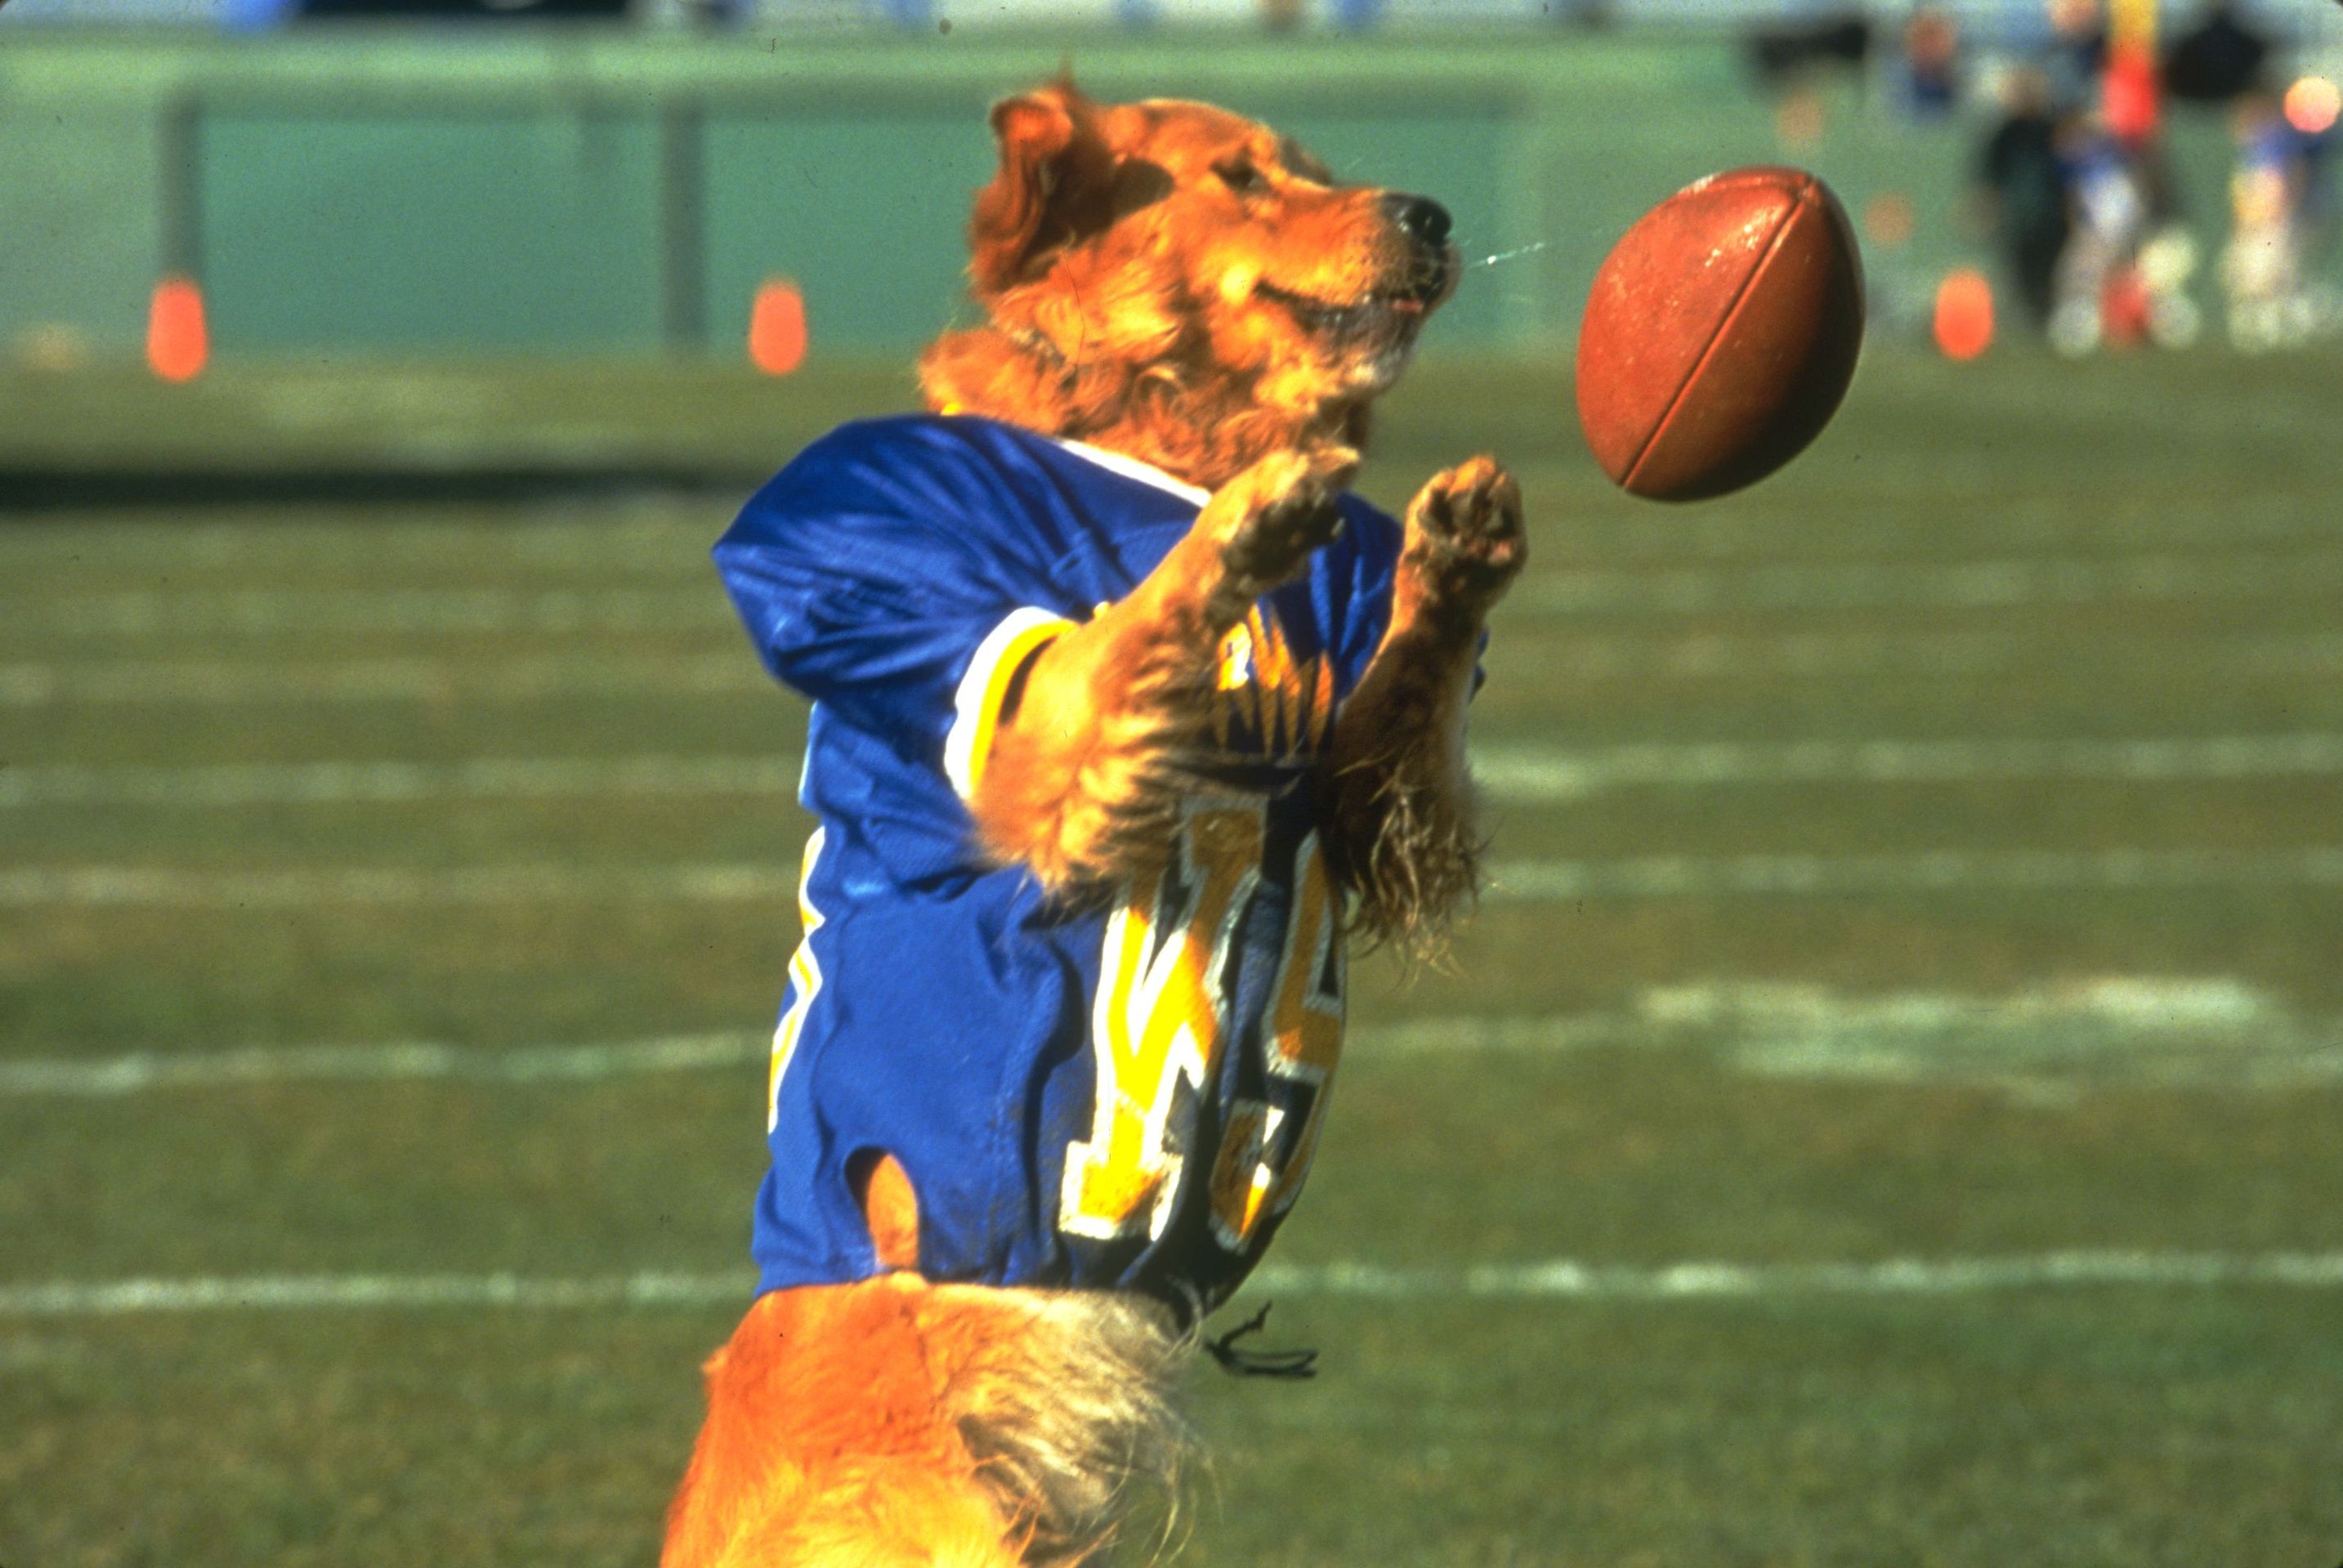 Air Bud Diagnosed With CTE – The Dartmouth Jack-o-Lantern